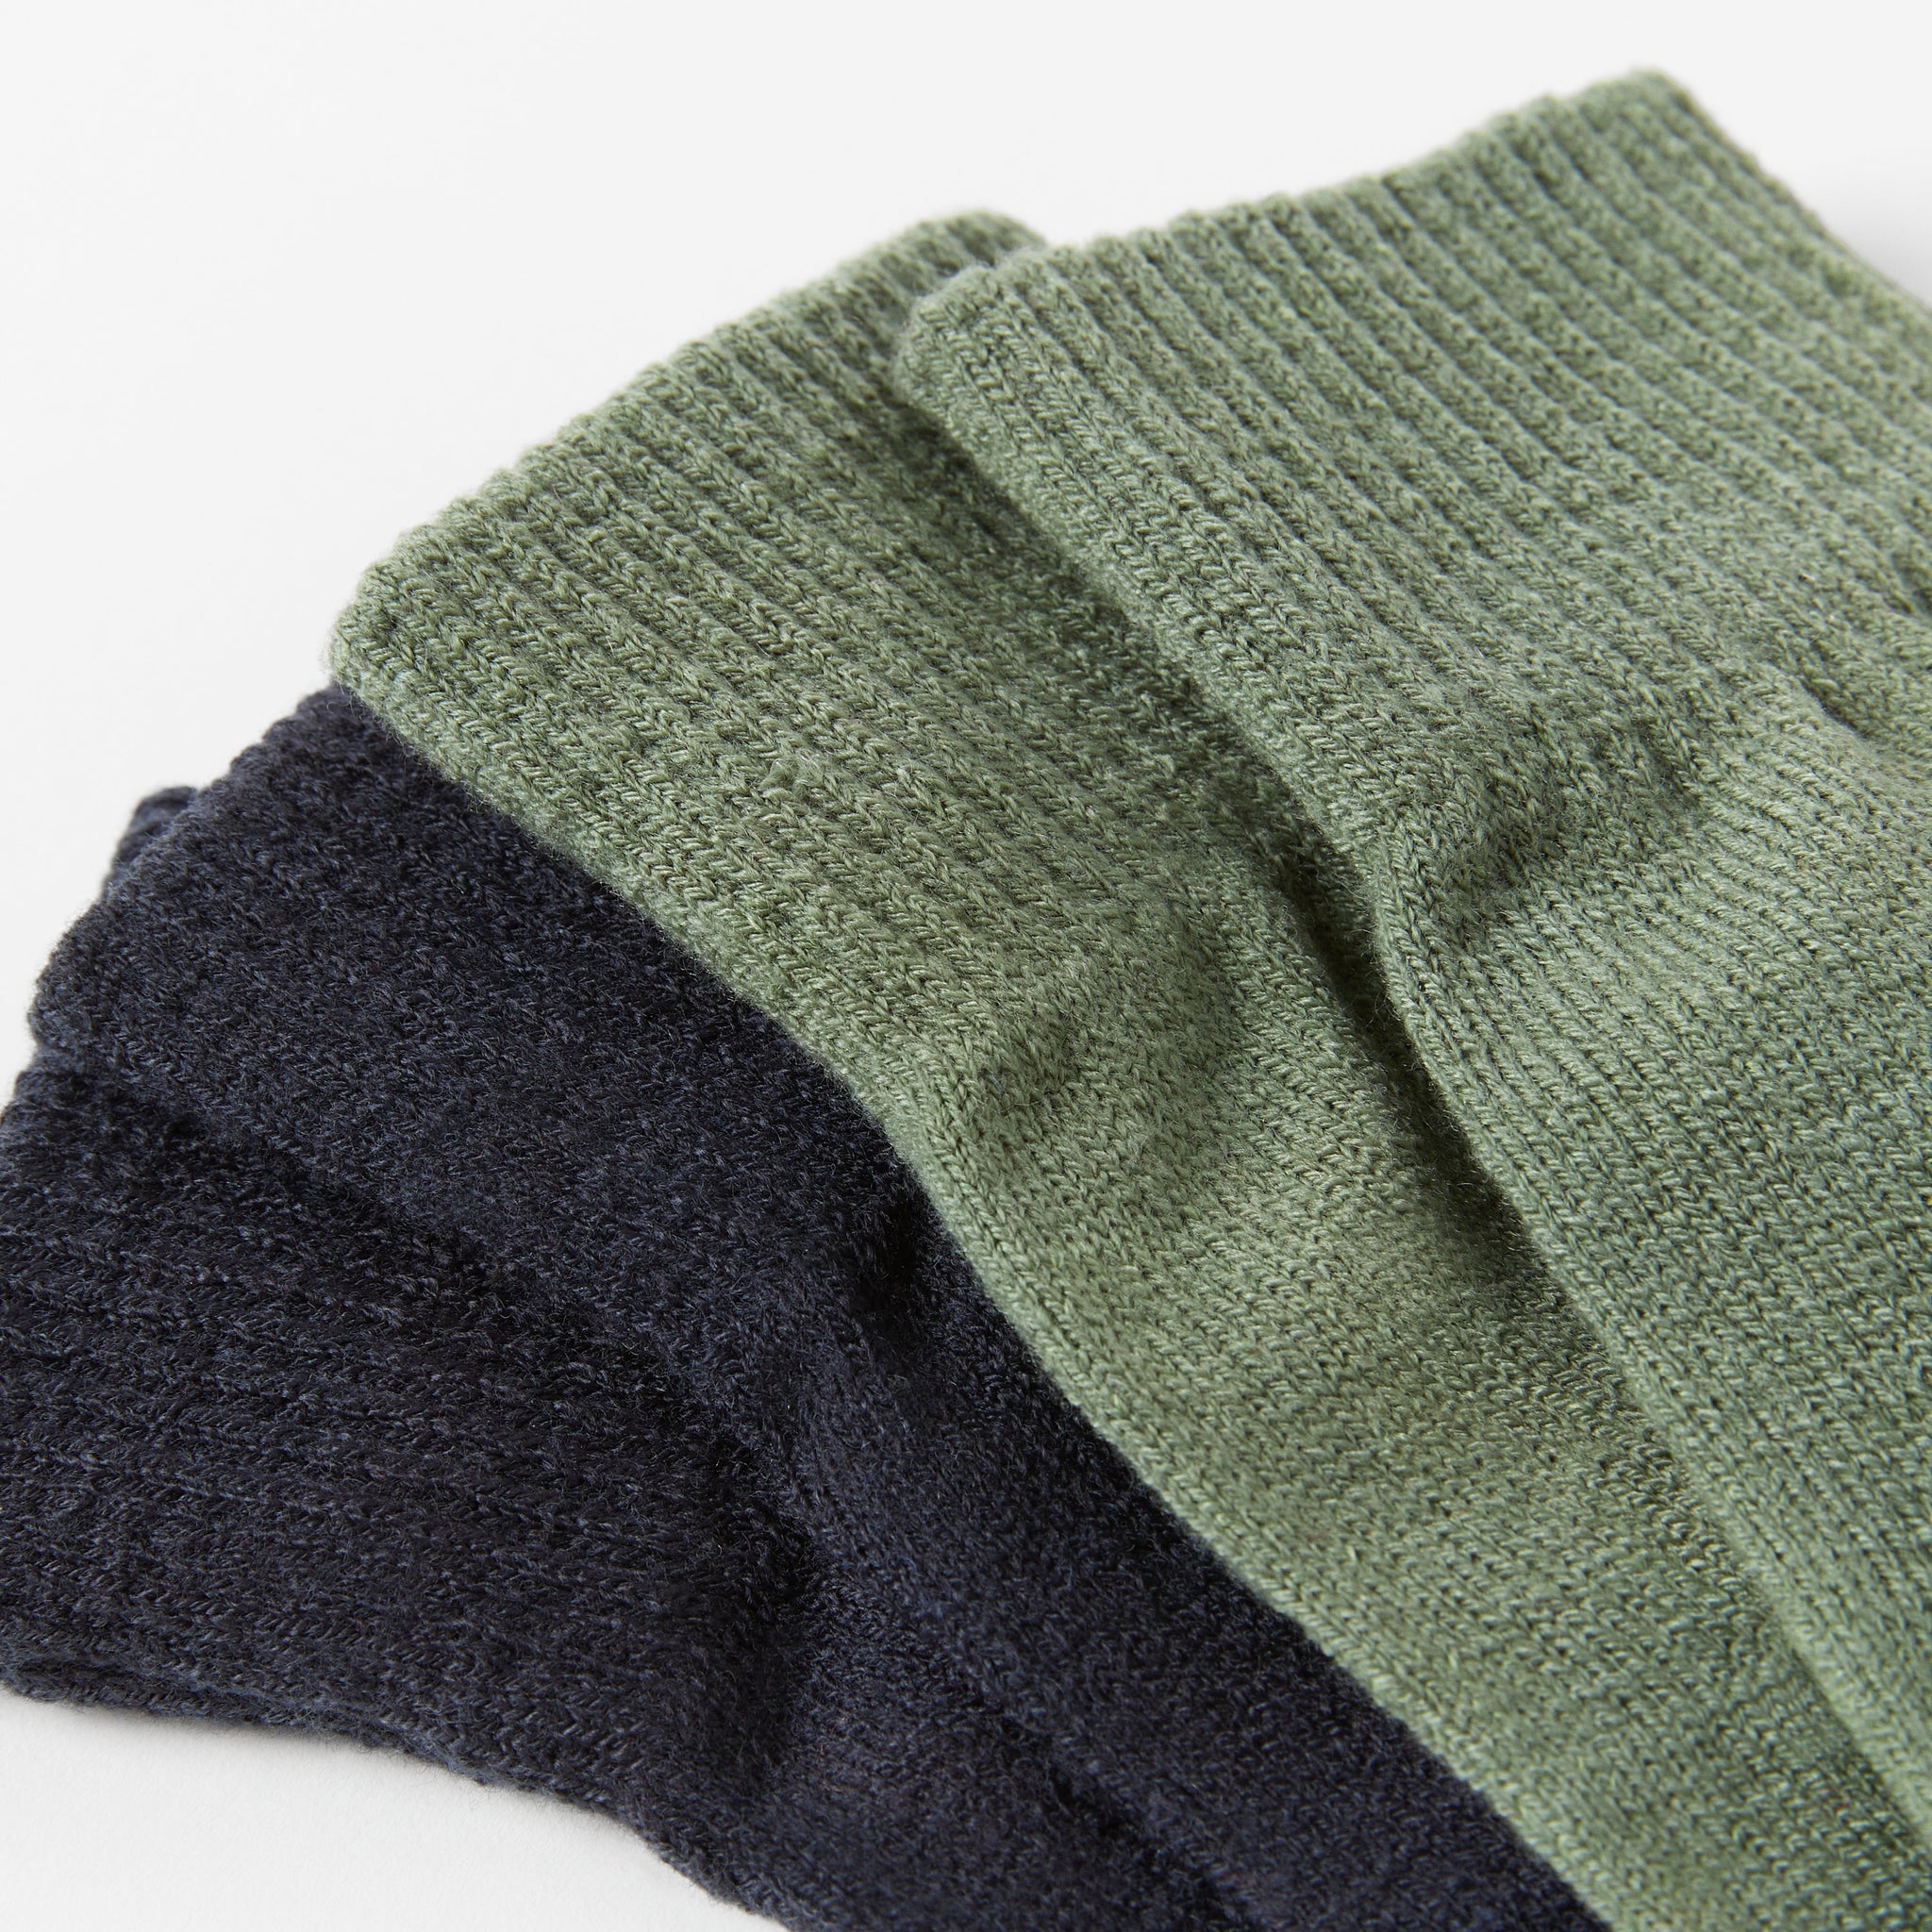 Green Magic Kids Gloves Multipack from the Polarn O. Pyret kidswear collection. Made from sustainable sources.